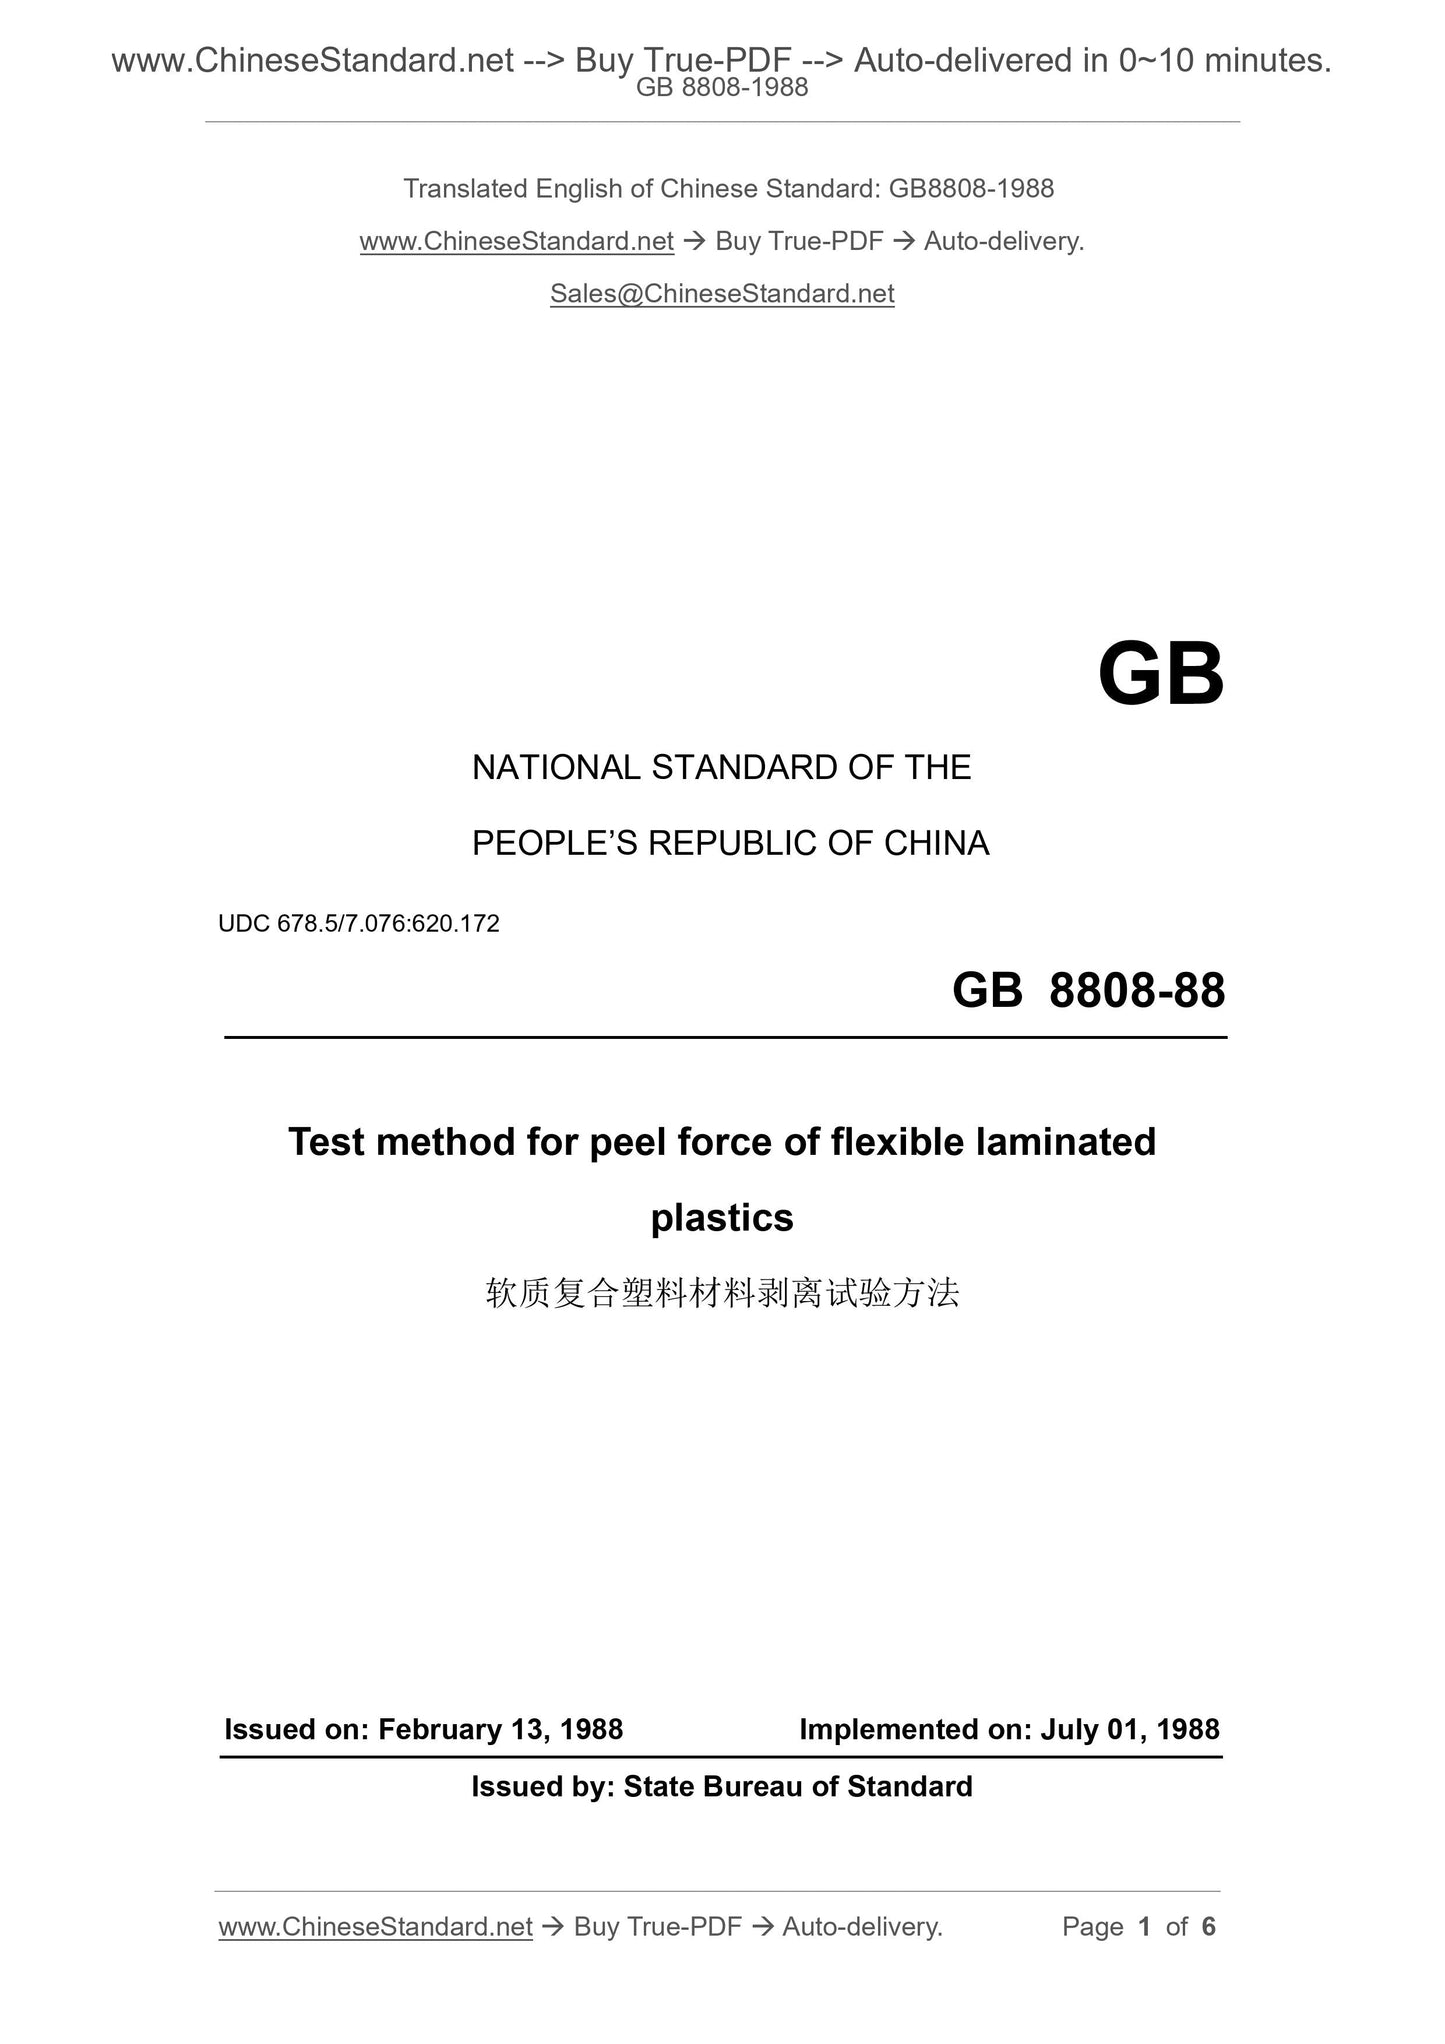 GB/T 8808-1988 Page 1